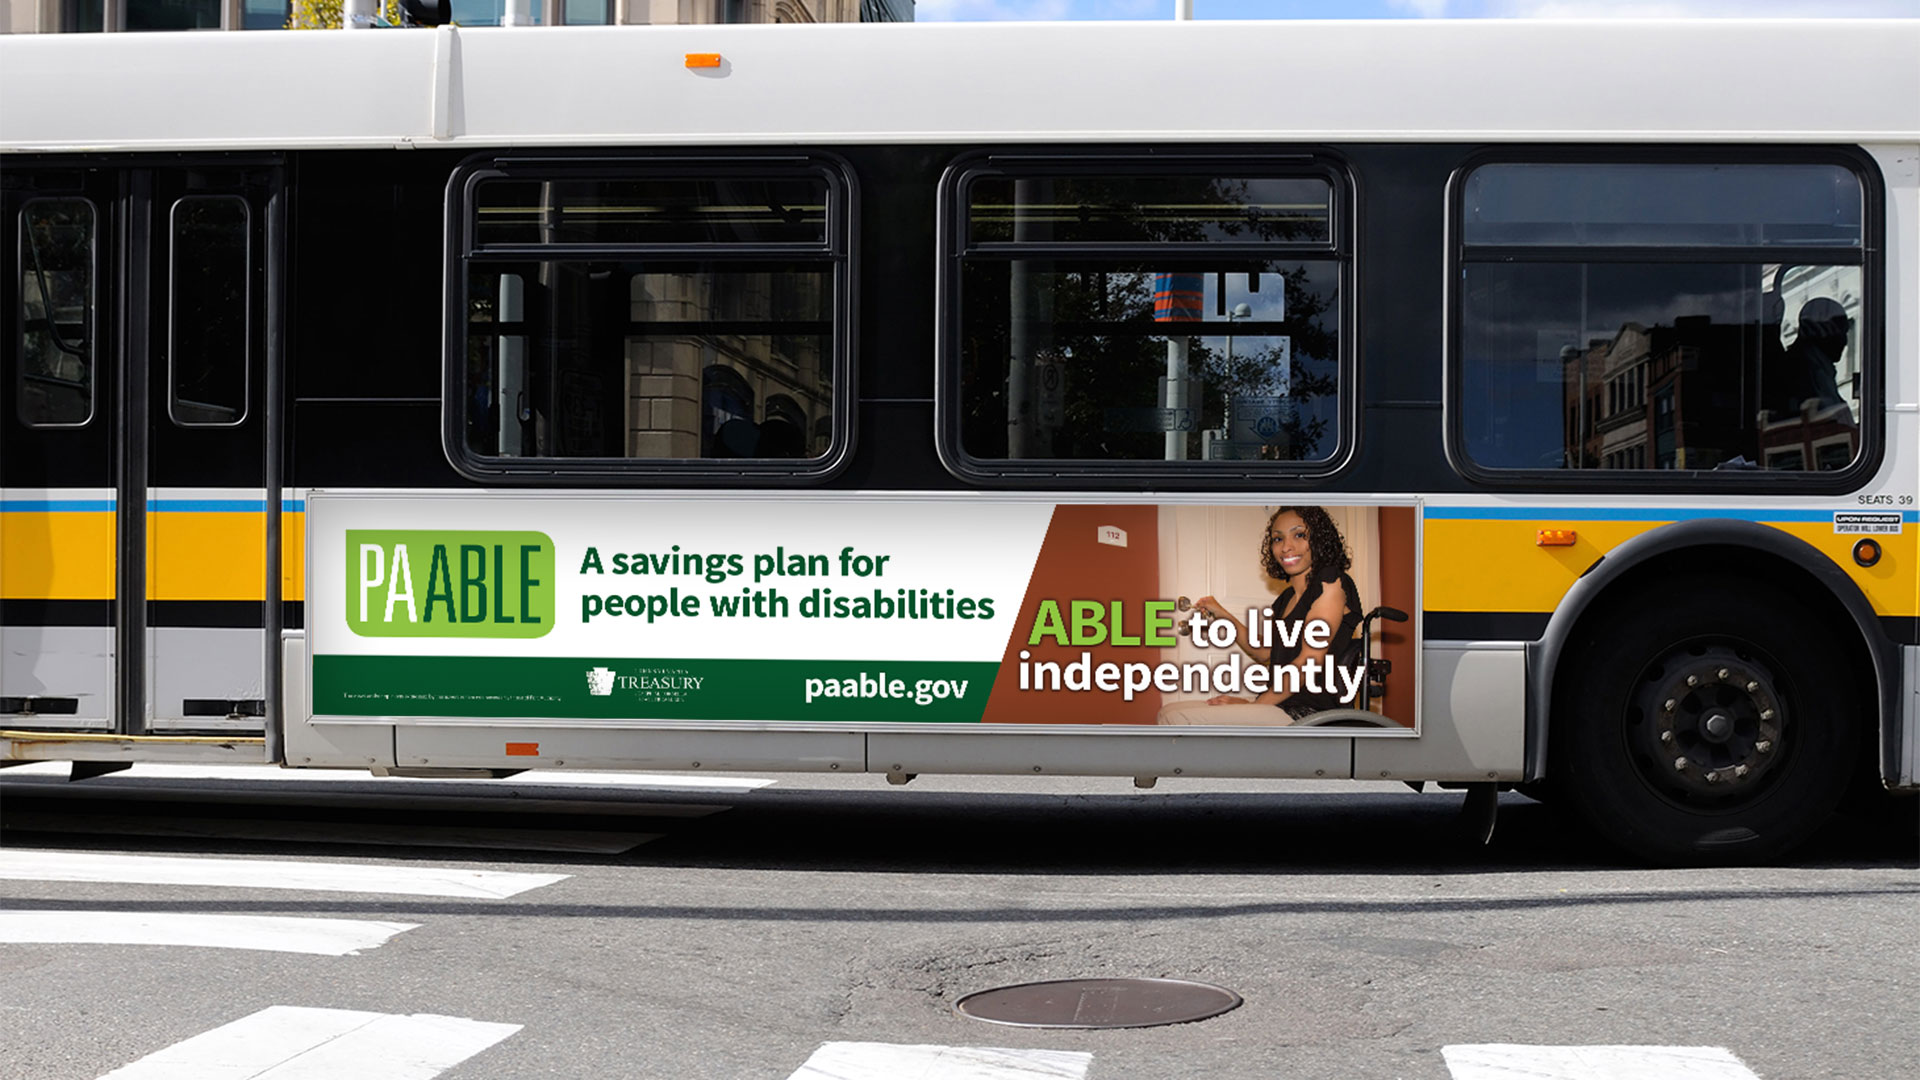 An advertisement on the side of a bus depicting PA ABLE campaign graphics